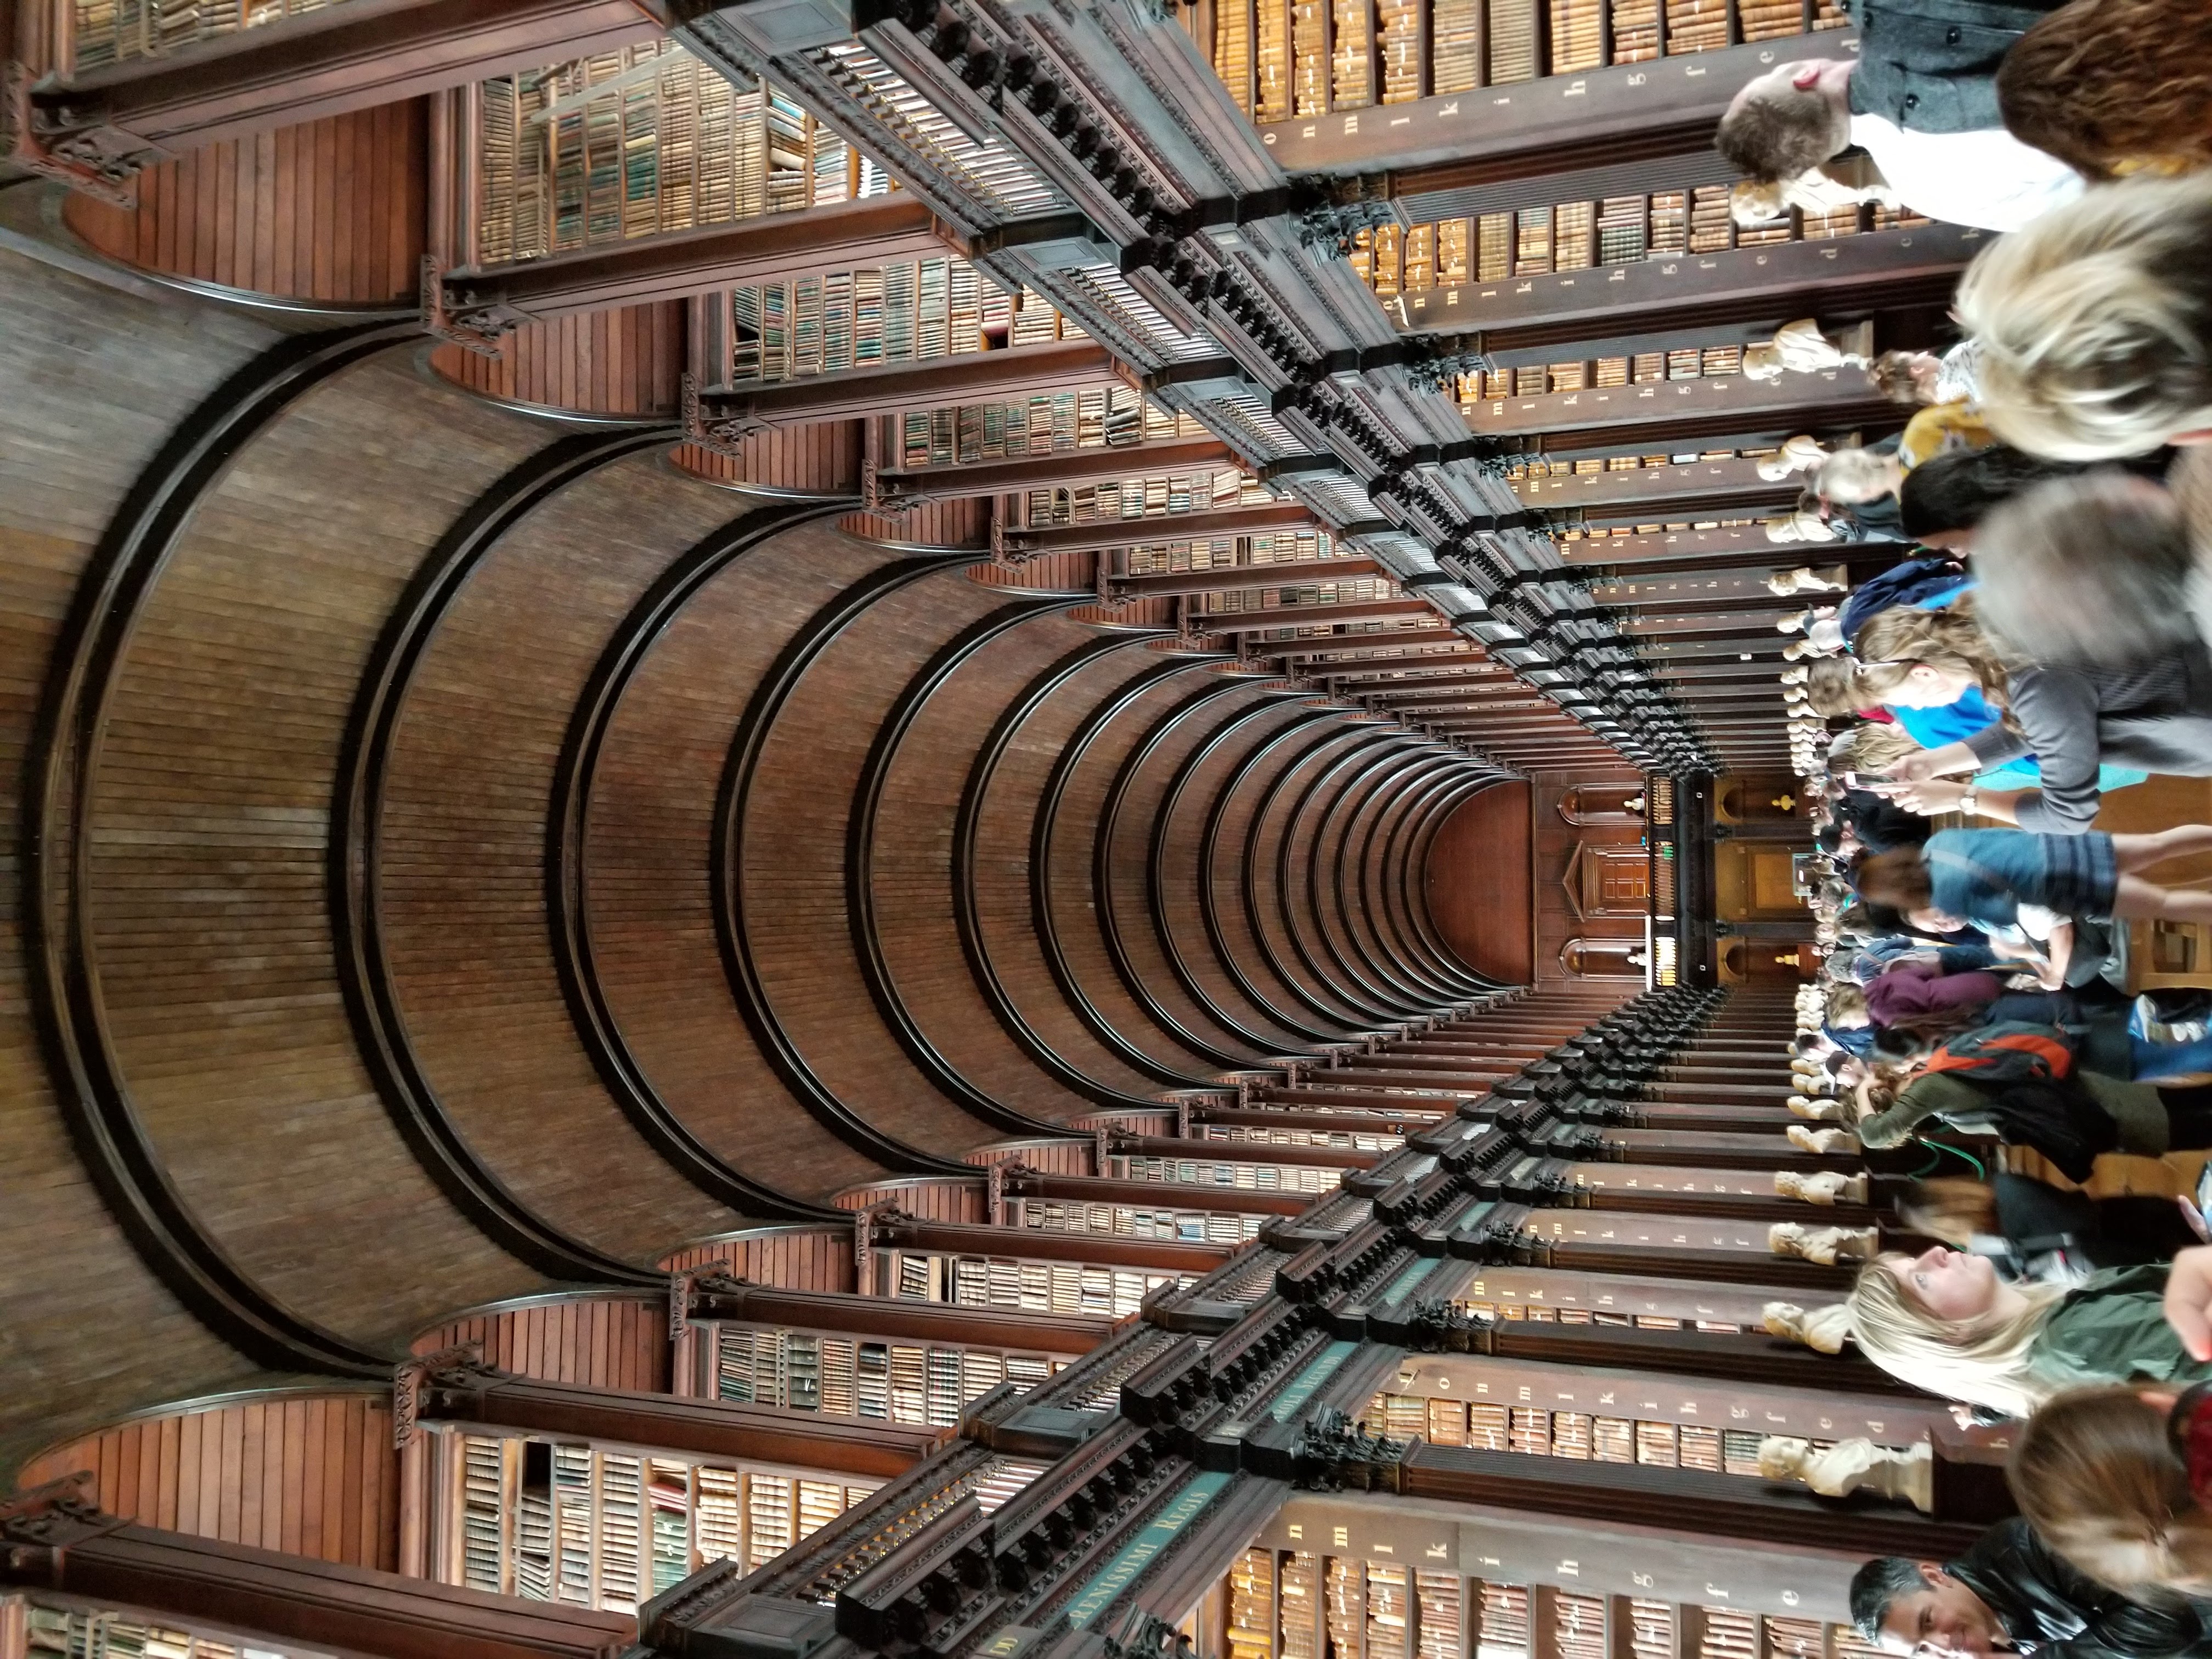 Trinity Library. A large arched ceiling, rows and rows of books on two separate floors, statues diving each aisle on the main floor. People are crowded along the walkway taking pictures.